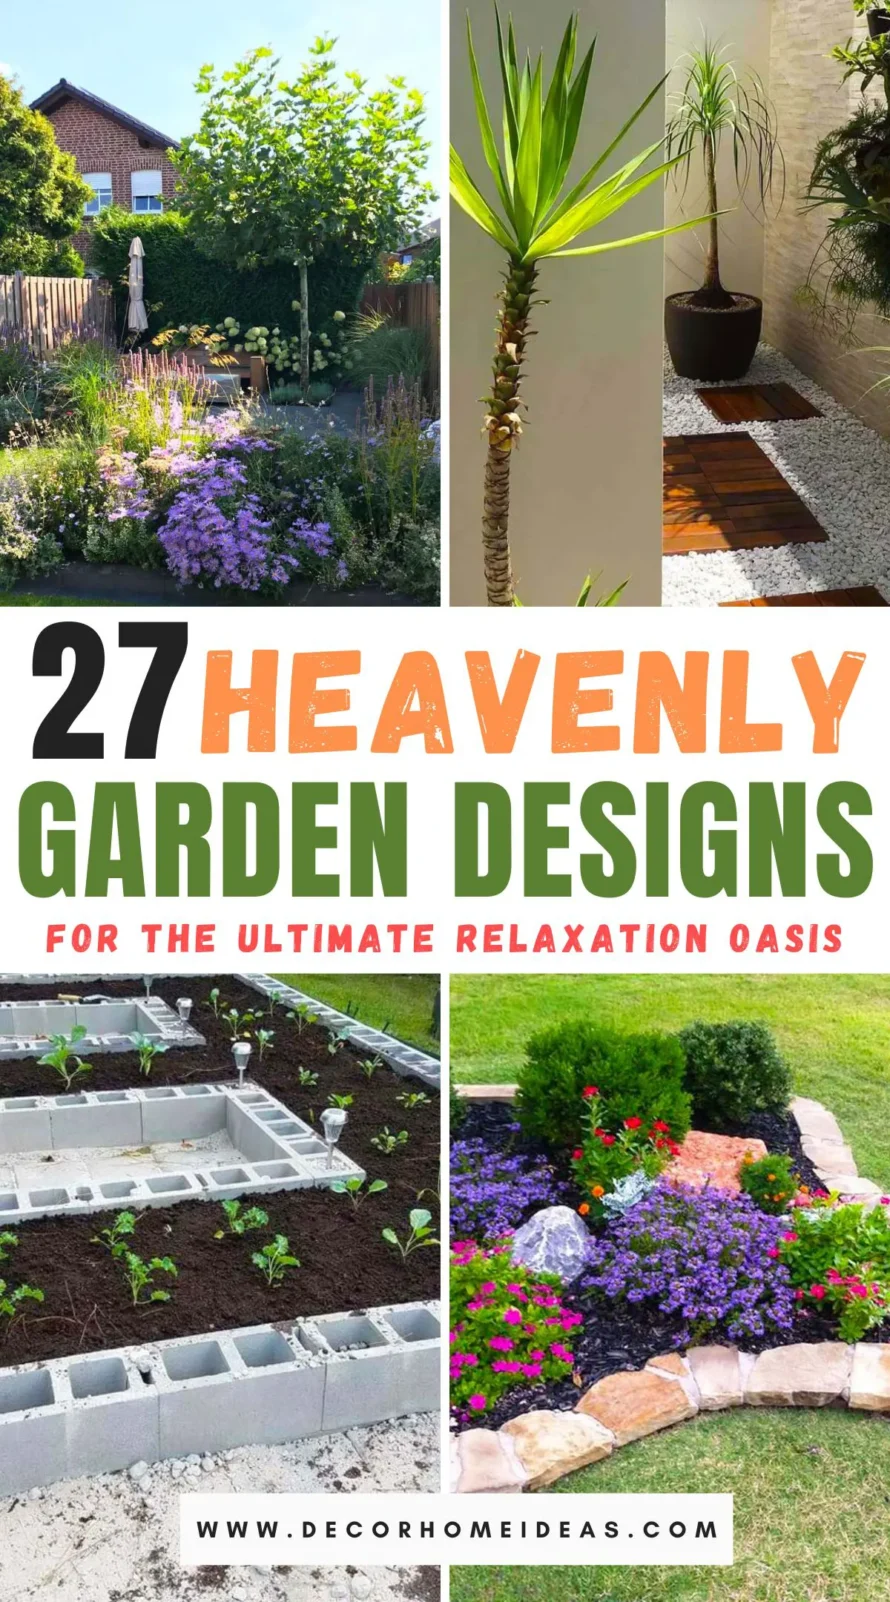 Explore 27 mesmerizing garden ideas that promise to transform your outdoor space into a heavenly hideaway. From secret gardens to enchanting pathways, get inspired to create your own slice of paradise.